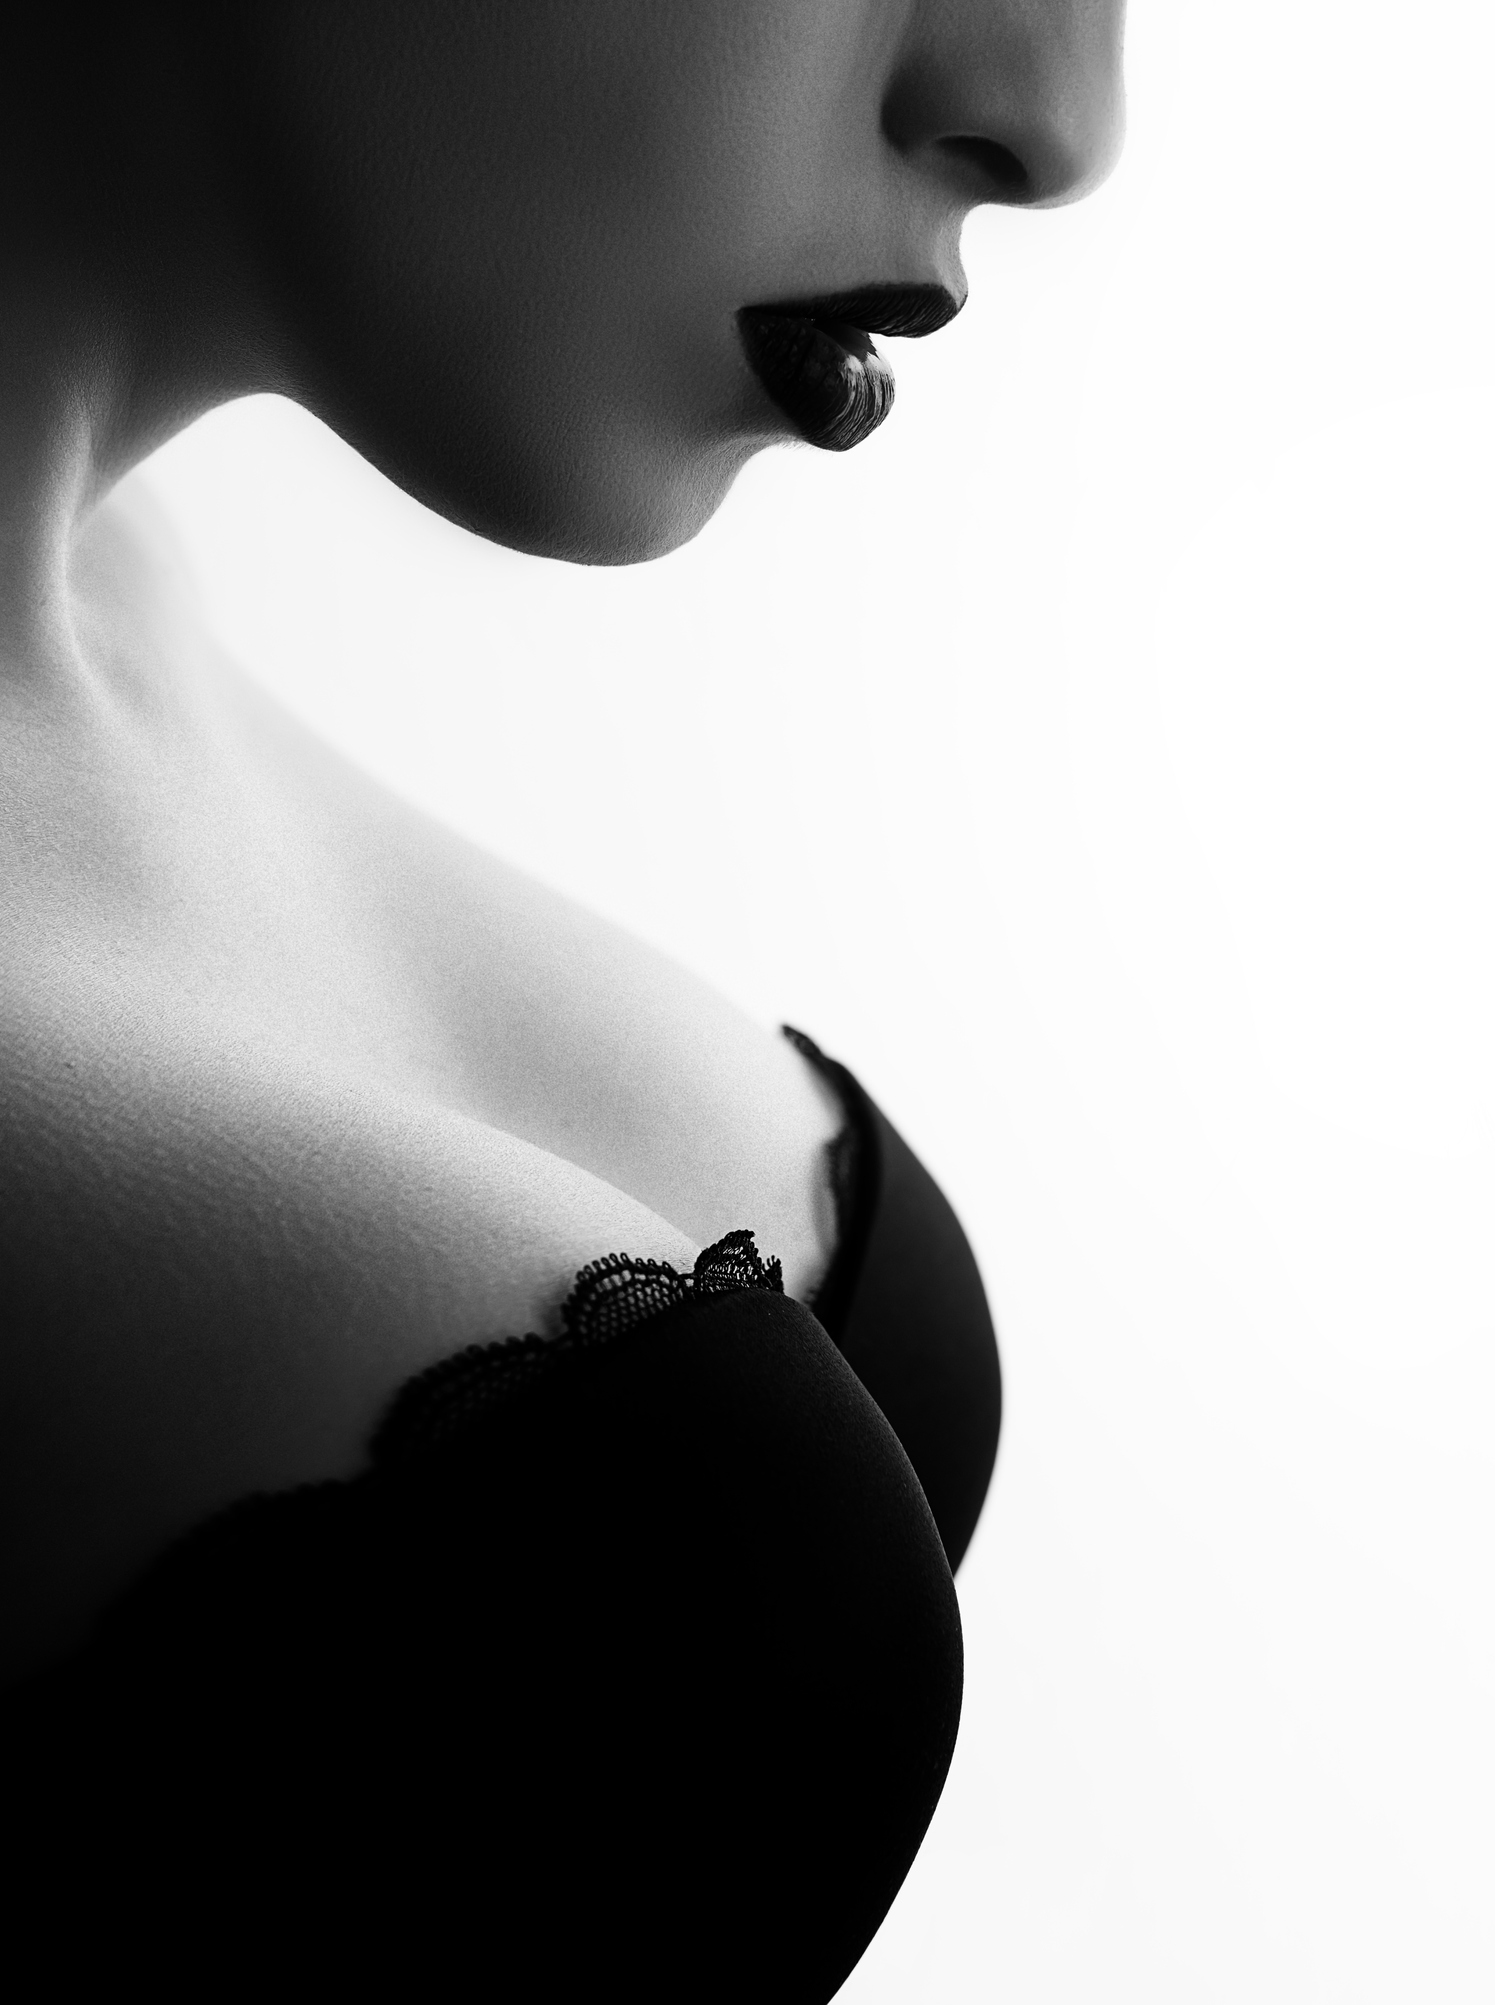 Black and White side view photo of Attractive woman with large breasts